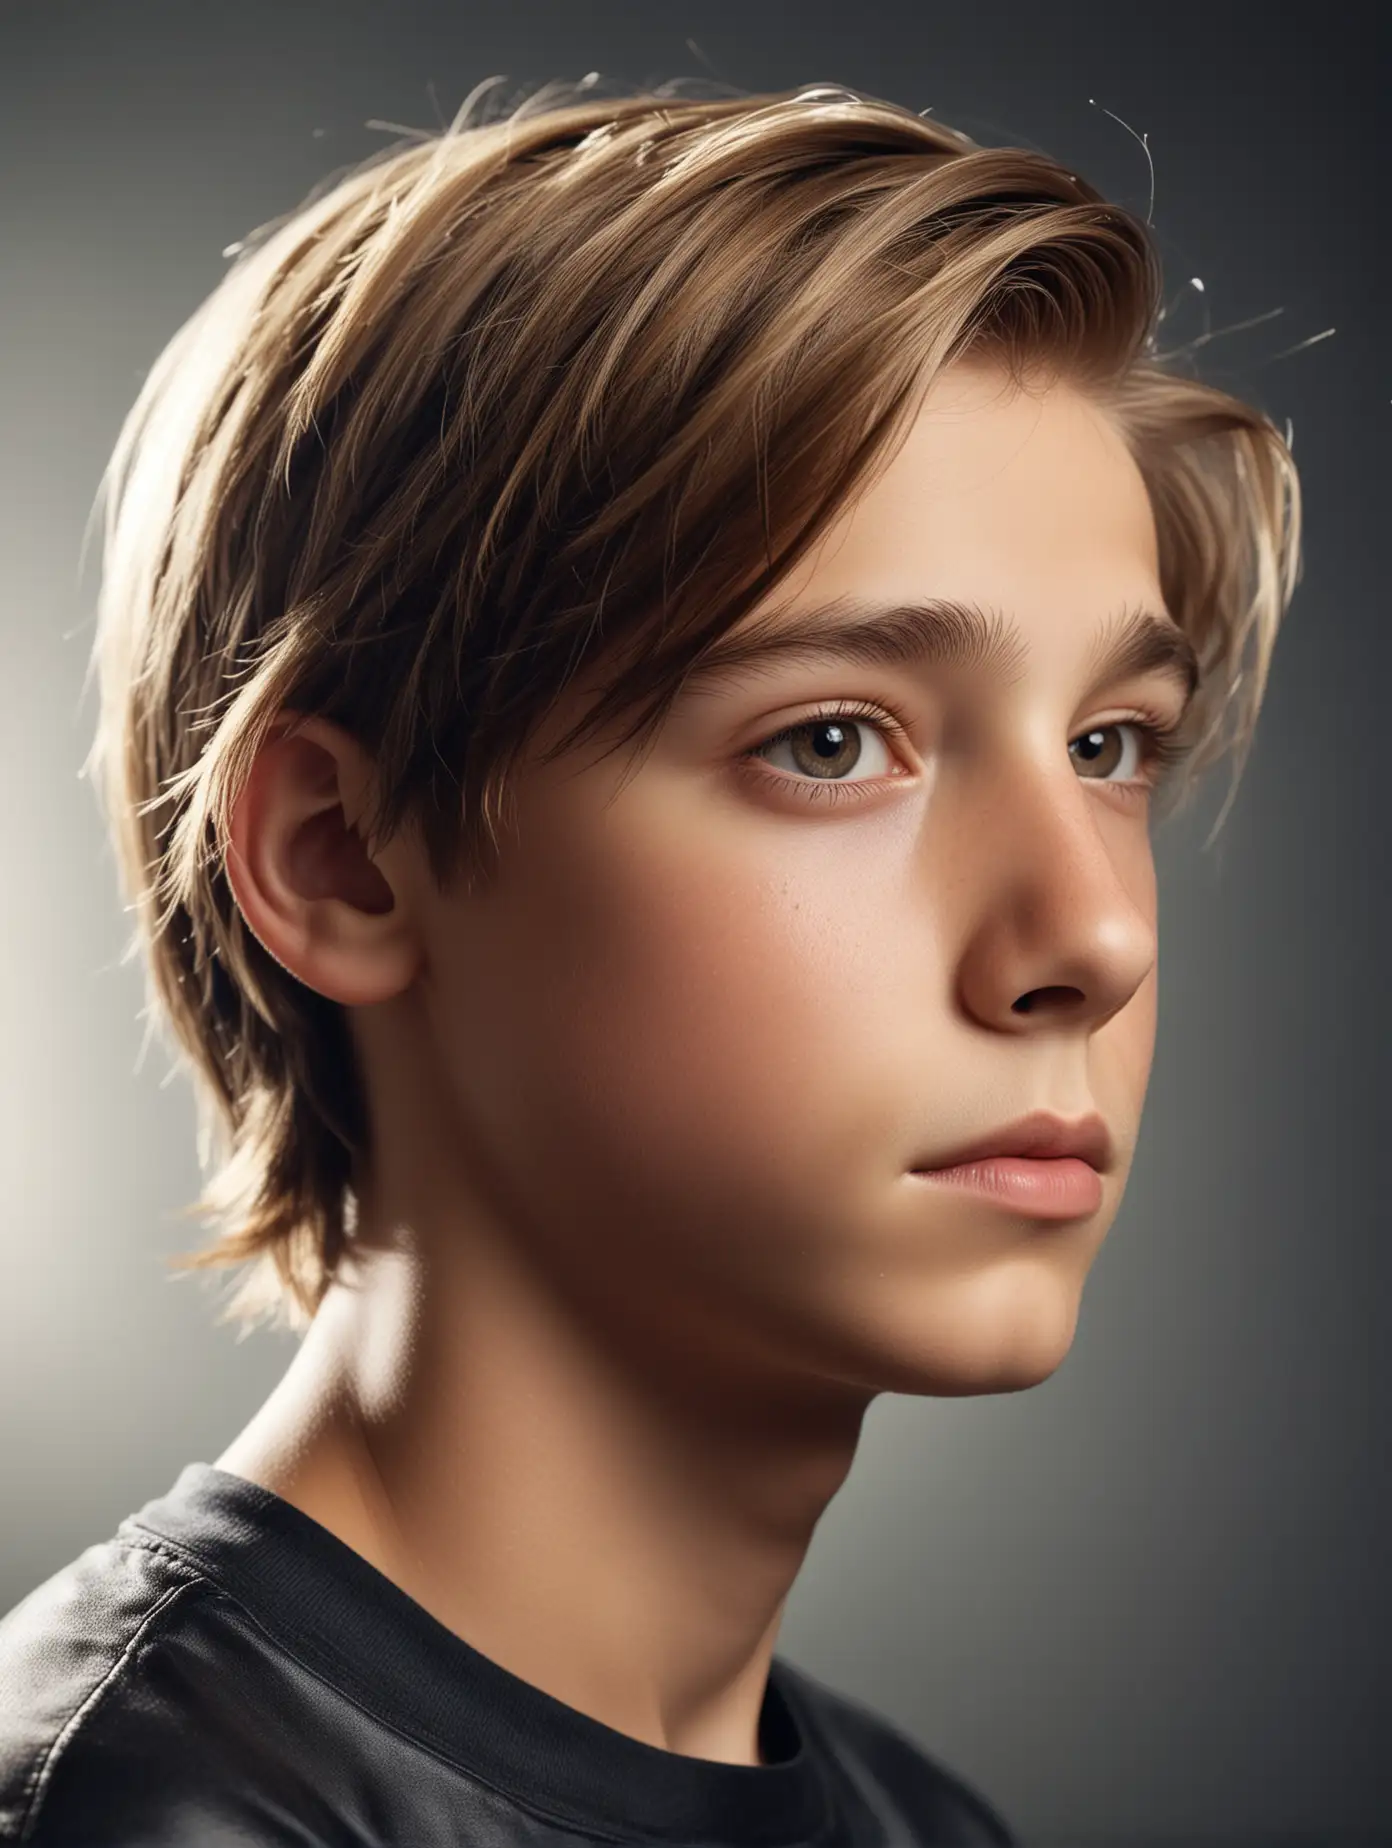 CloseUp Portrait of ThirteenYearOld Boy with Smooth Shiny Hair and Bright Overhead Lighting